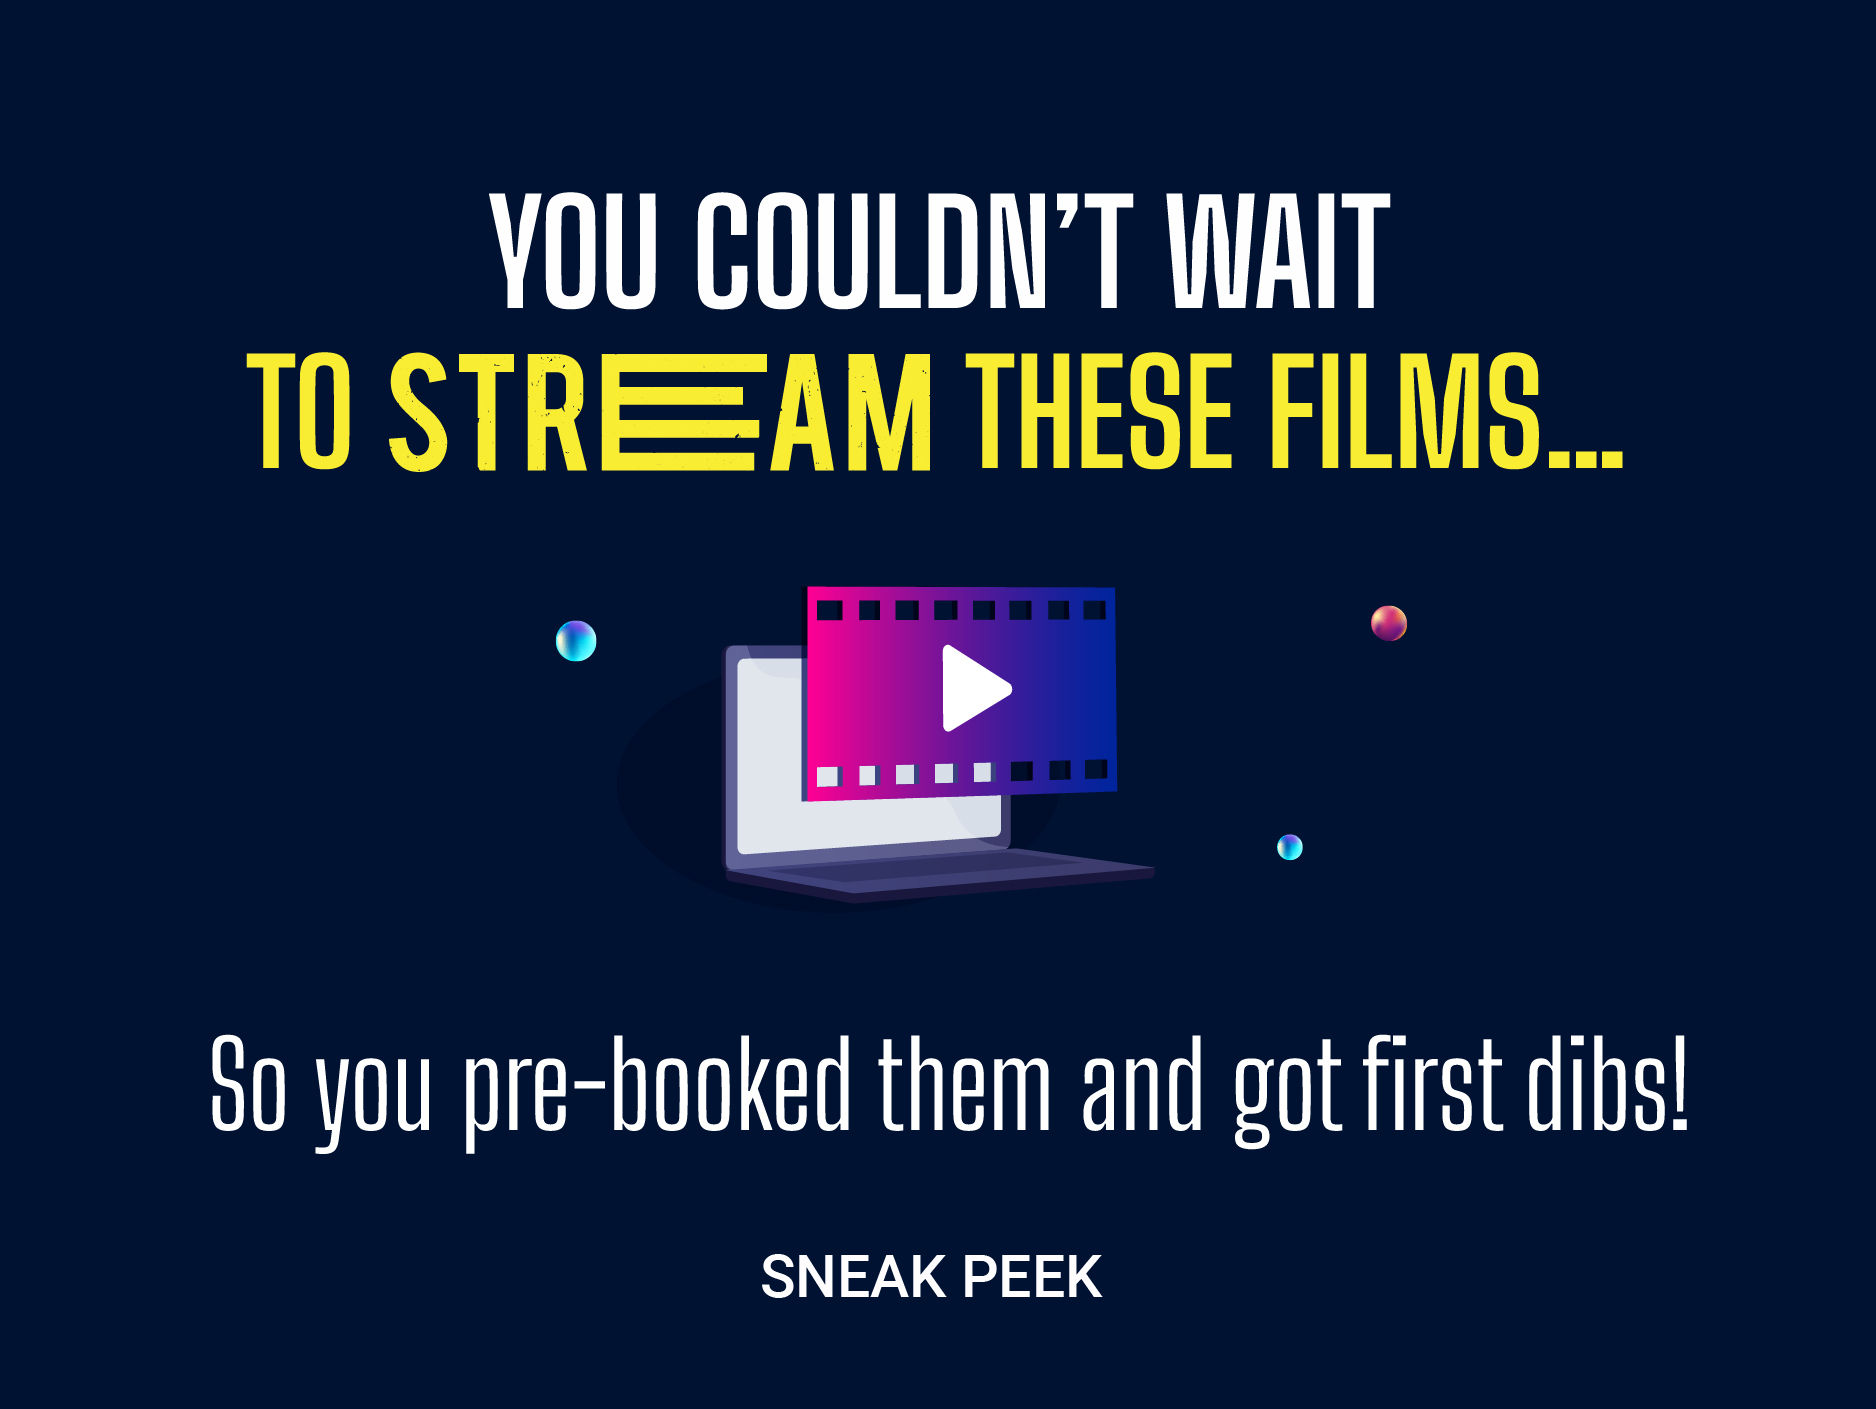 You couldn't wait to (STREAM) these films...So you pre-booked them and got first dibs!